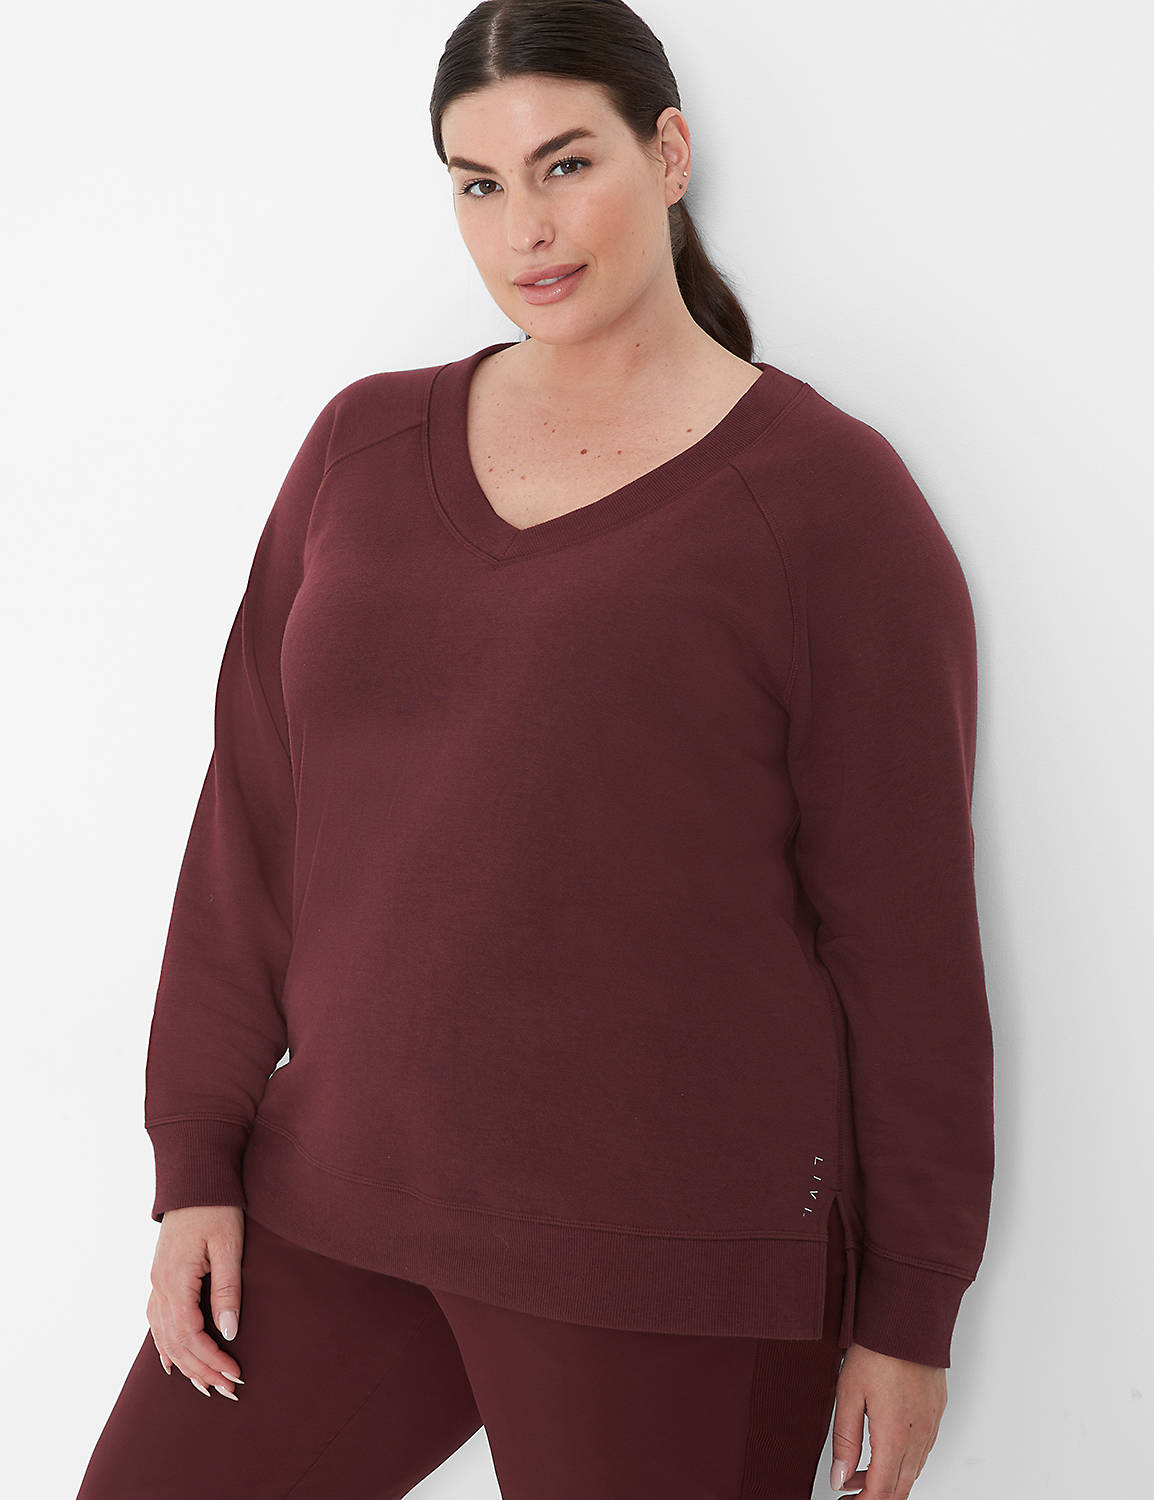 LIVI Long Sleeve Mid Vneck French T Product Image 1